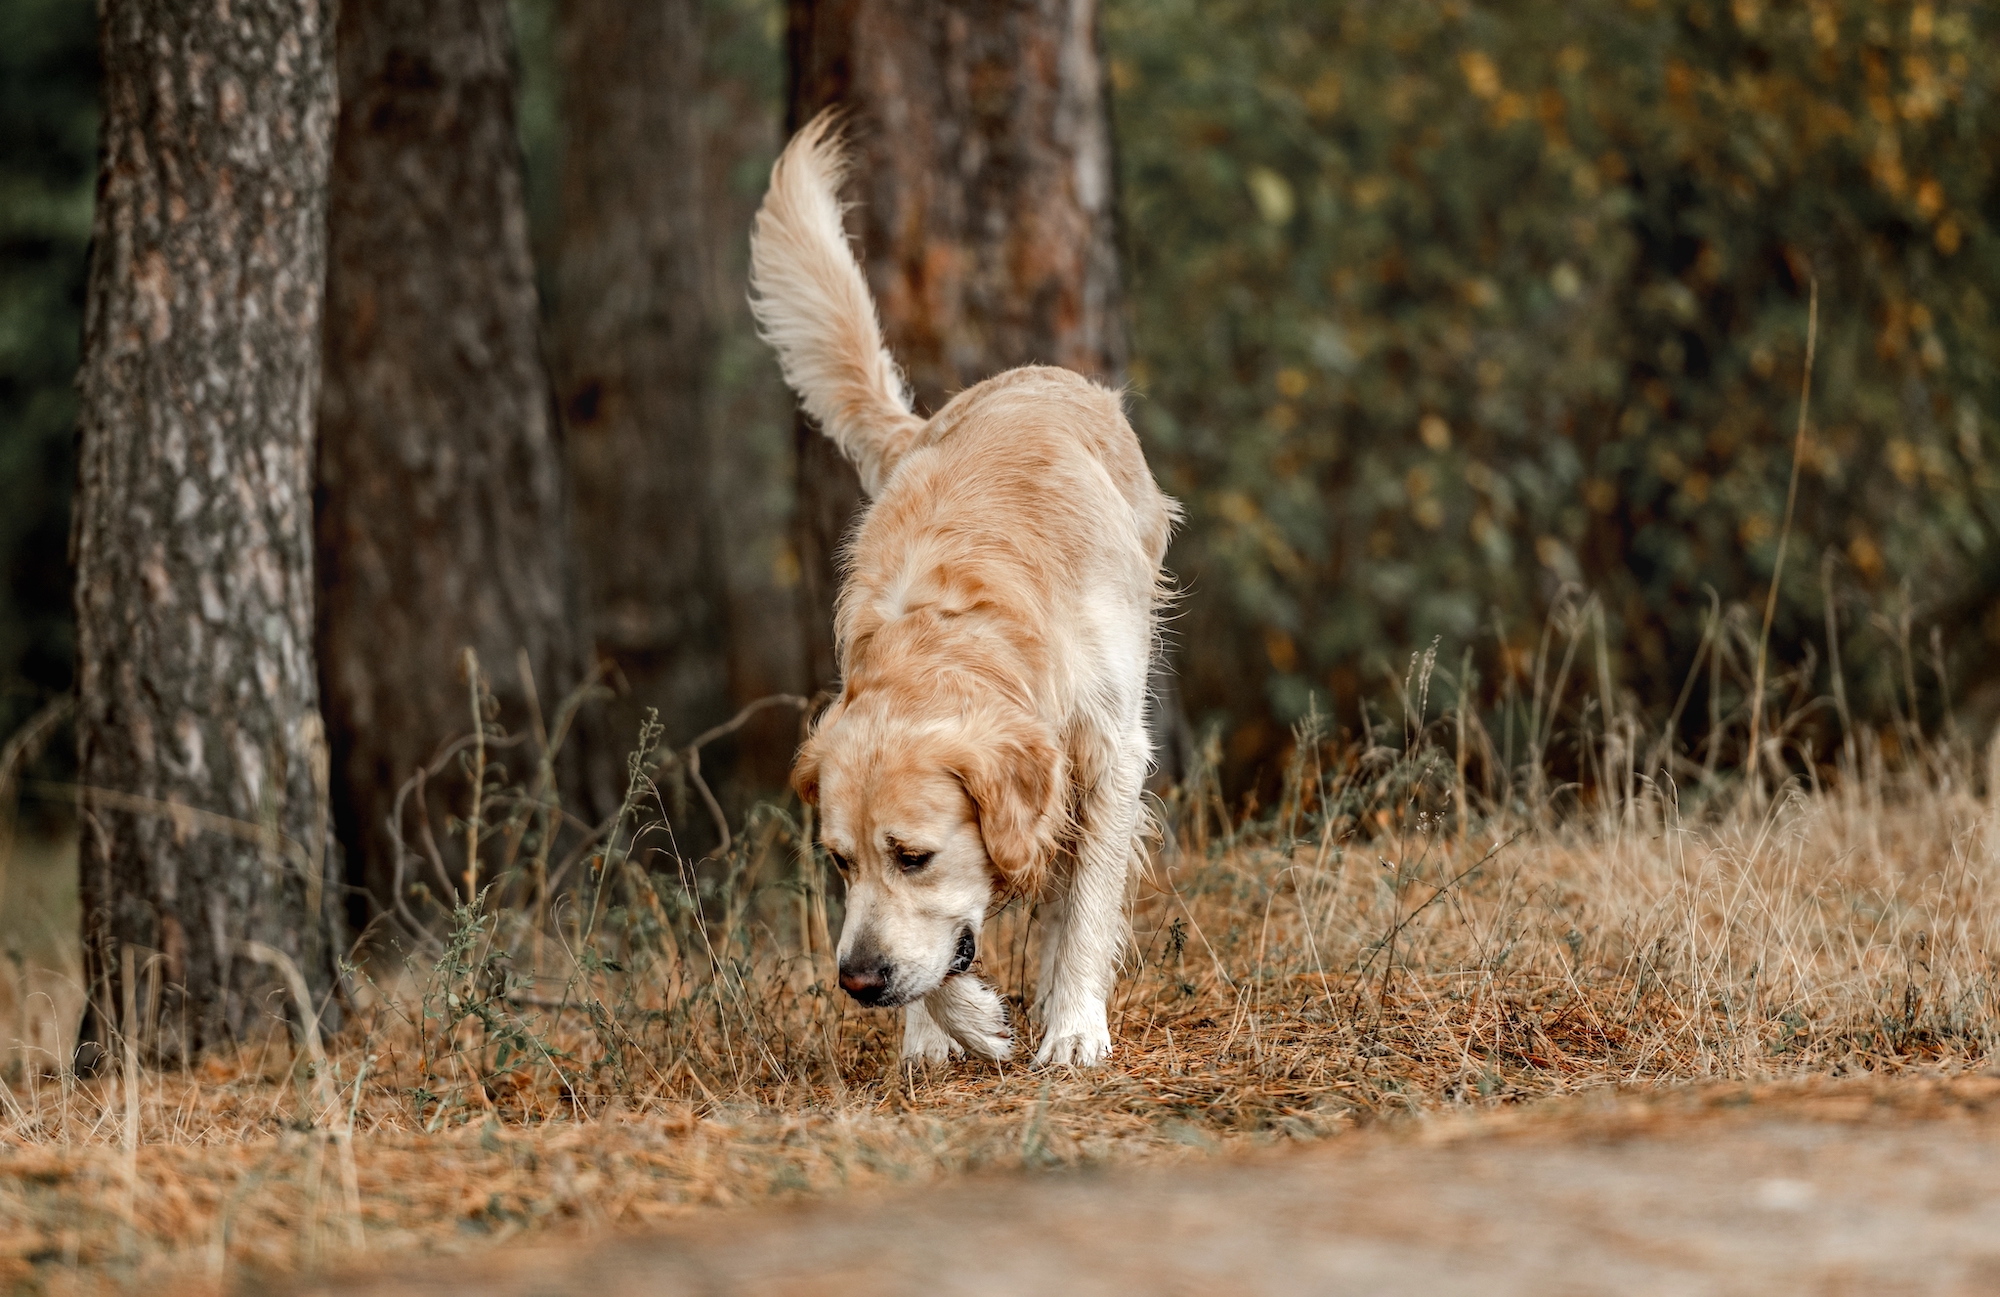 how can i prevent my dog from eating cat poop